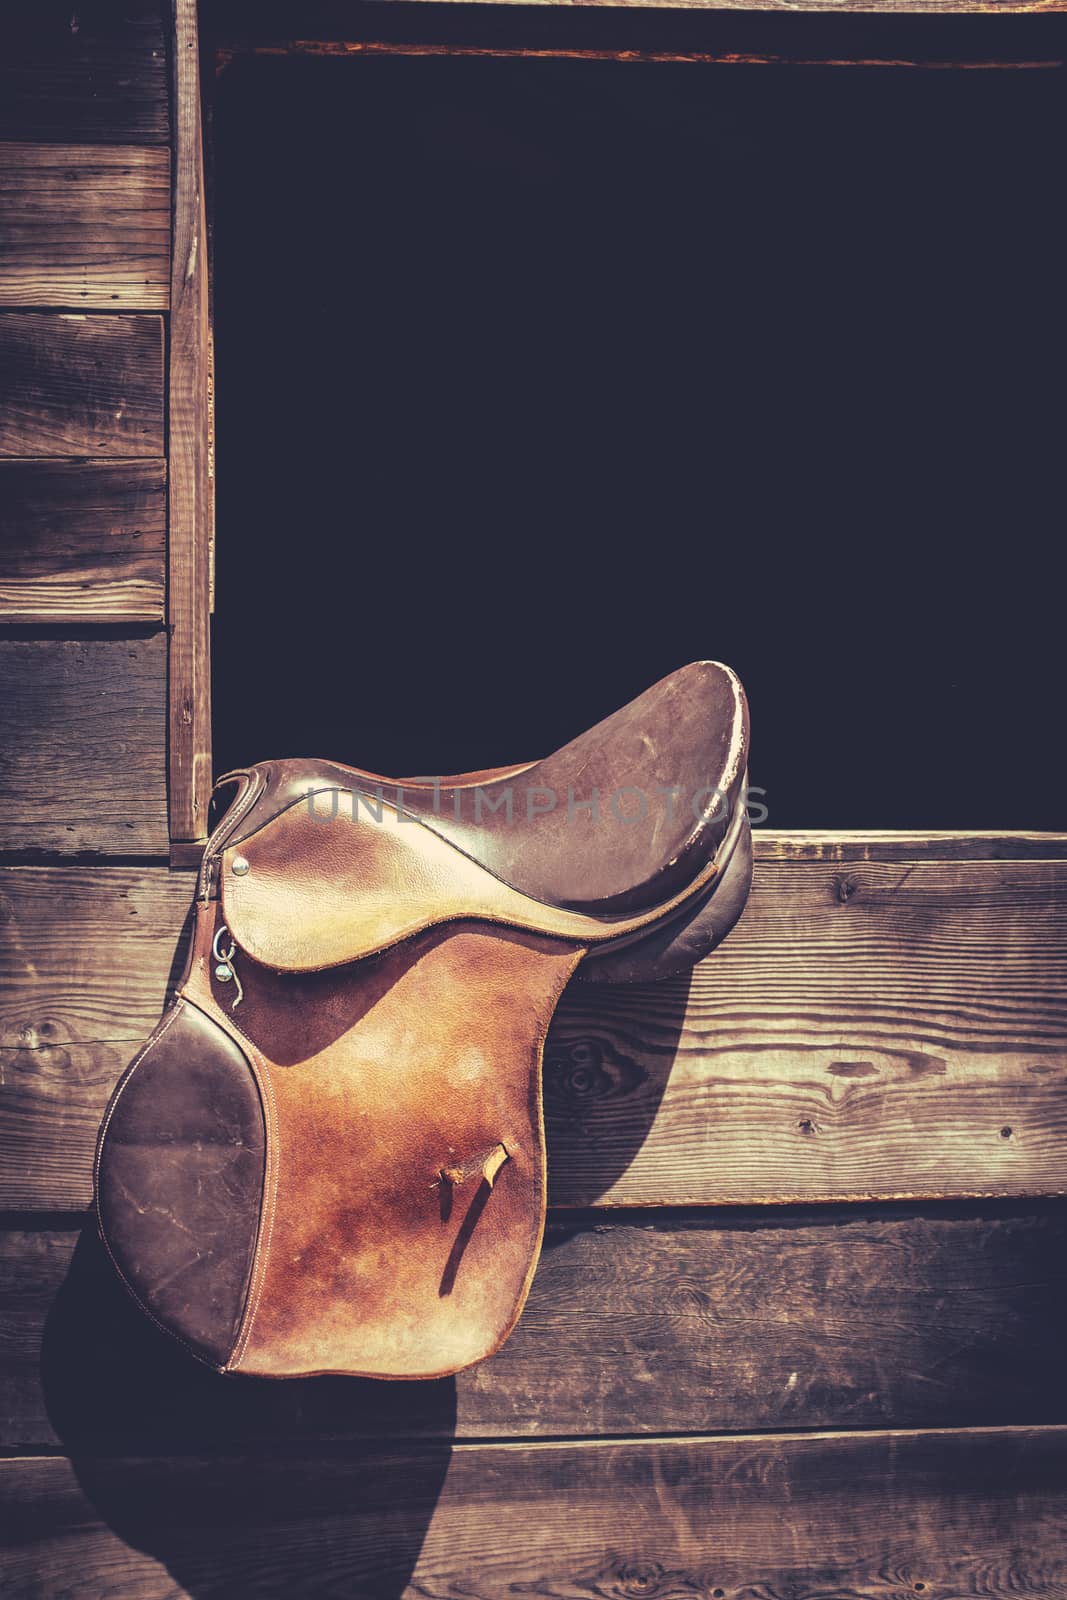 Americana Image Of A Horse Saddle Hanging In A Ranch Stable Door With Copy Space